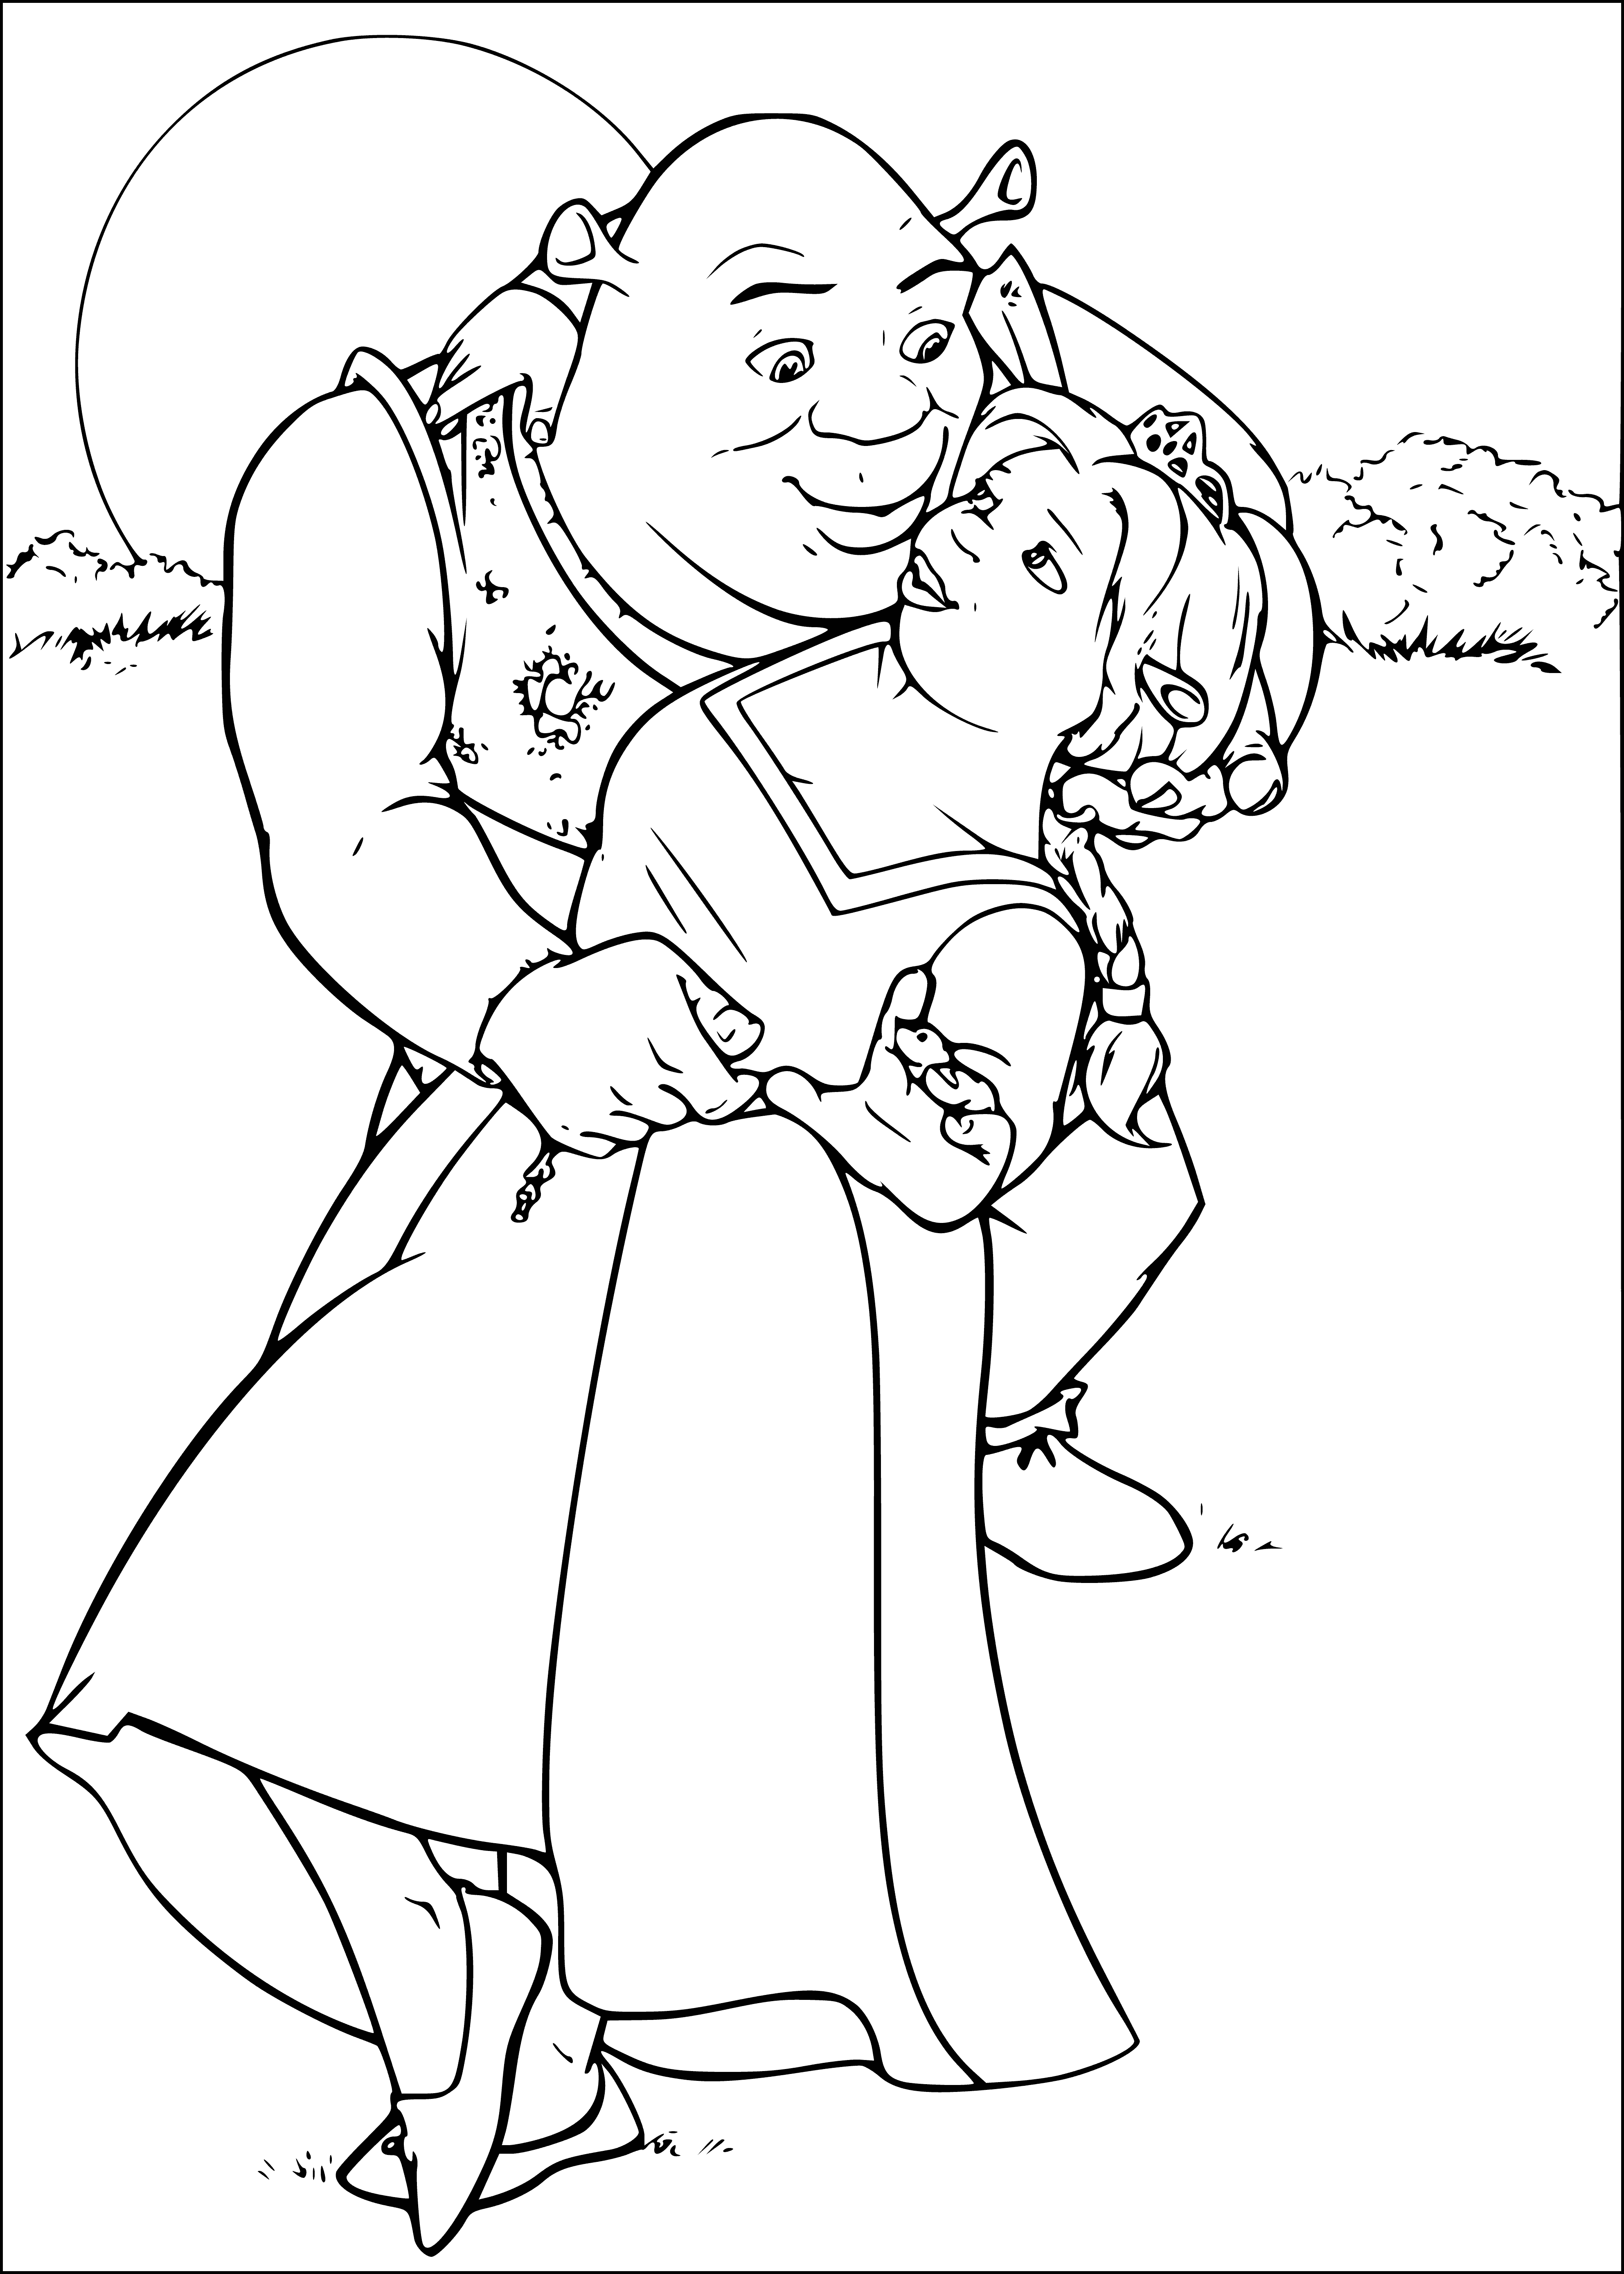 coloring page: Shrek & Fiona face off, arms crossed & hands on hips, looking mad.